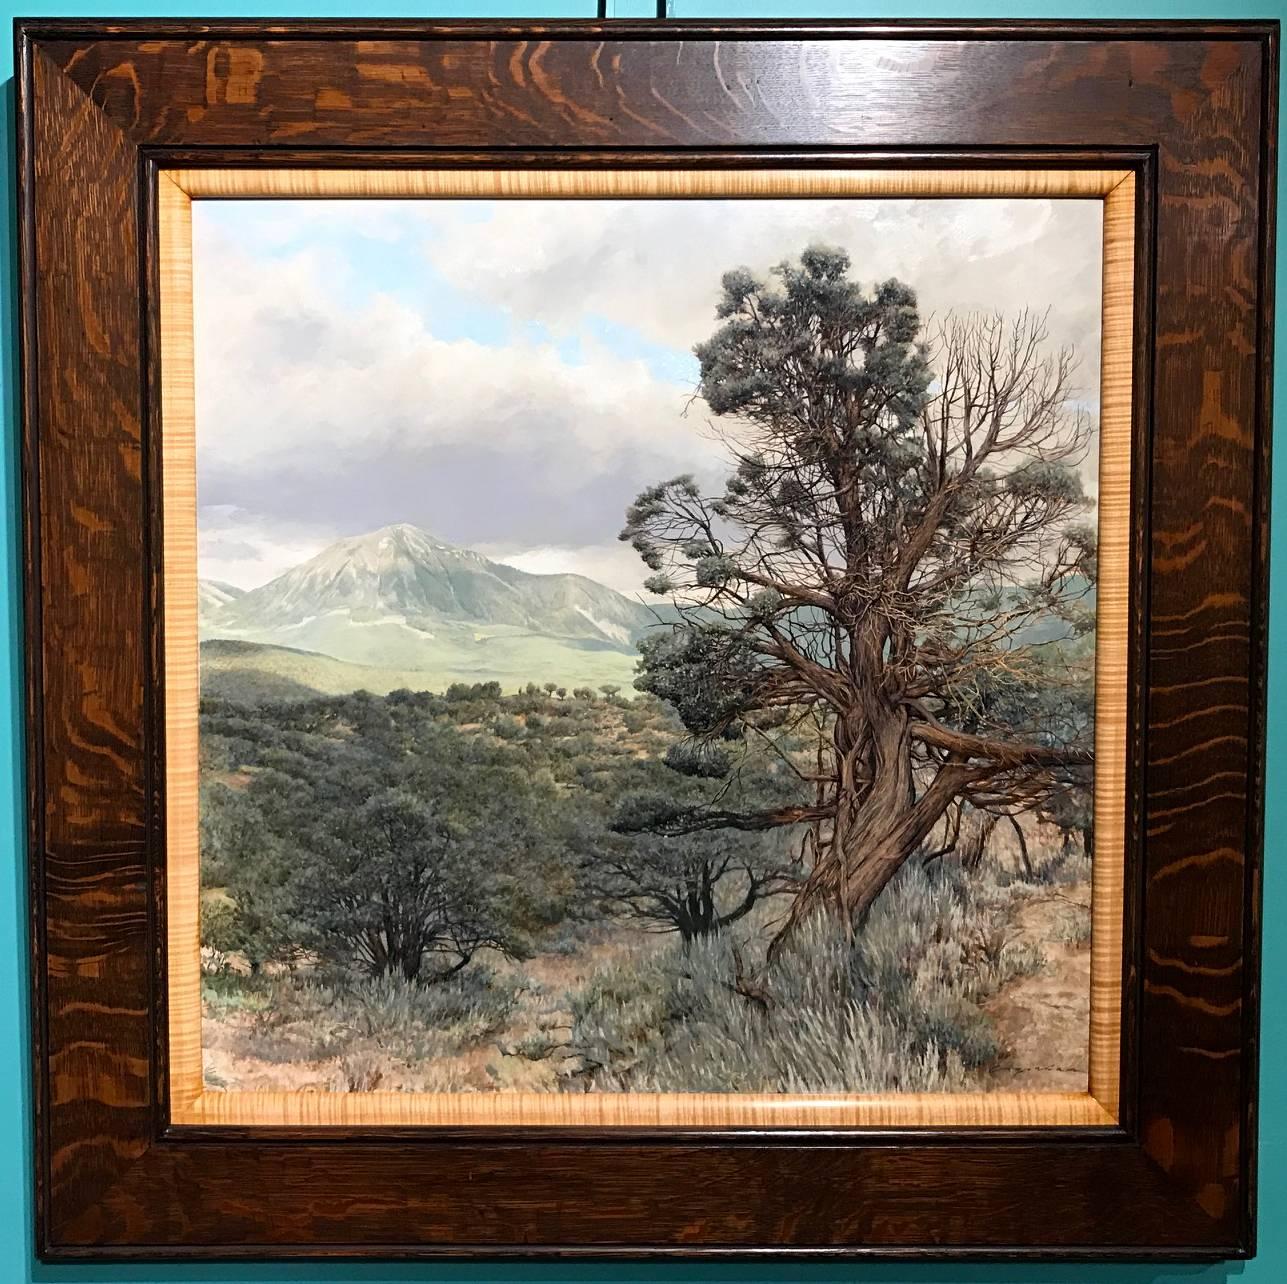 This wonderful mountain landscape depicting Mt. Lamborn and its ancient junipers was painted by contemporary American artist Erick Ingraham (1950-). Ingraham was born in Philadelphia, PA and became a well-established Monadnock region artist in New